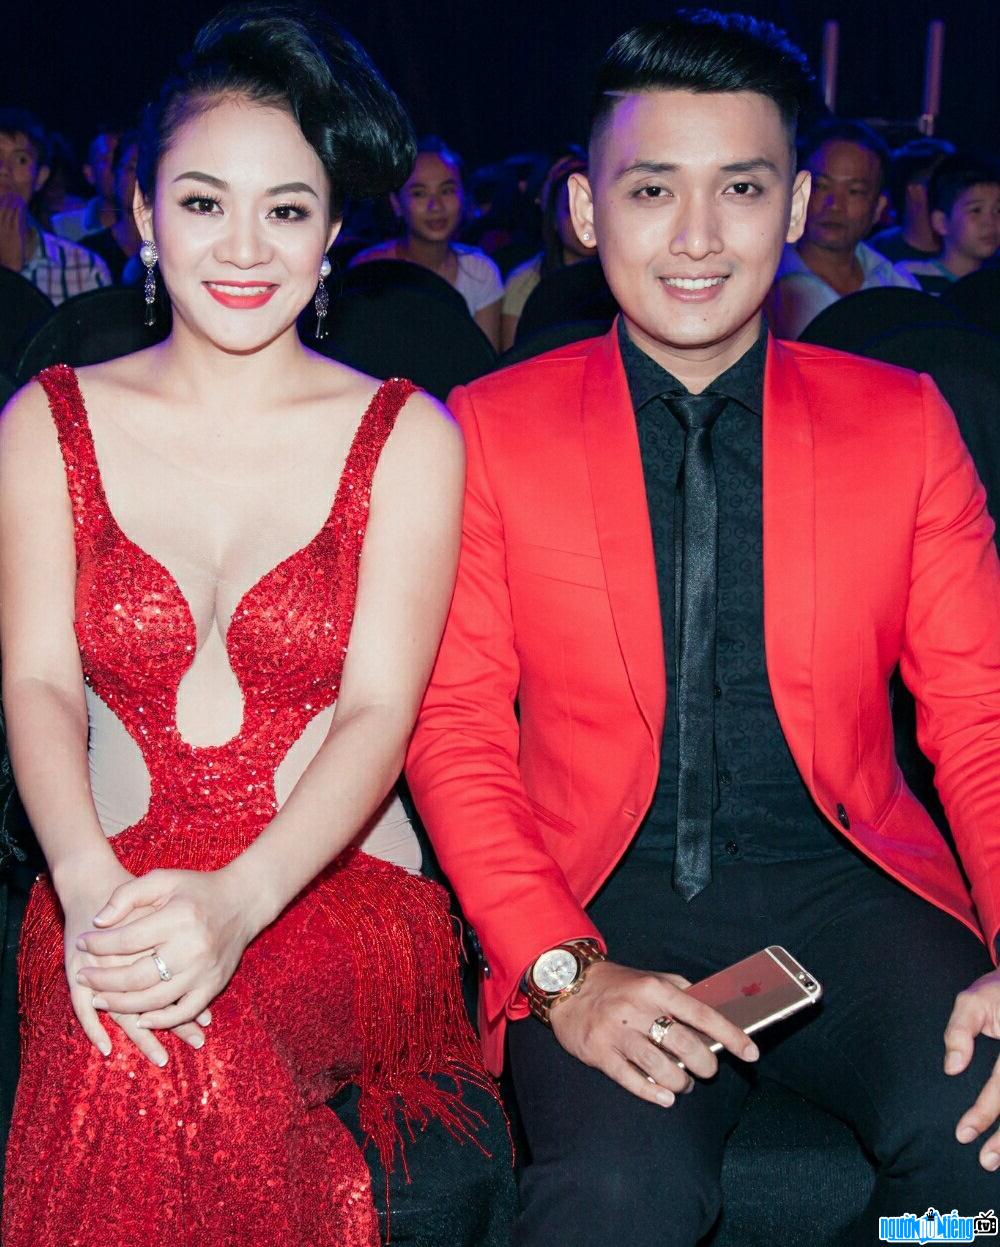  Photo of singer Doan Tuan and runner-up Quynh Mai at an event